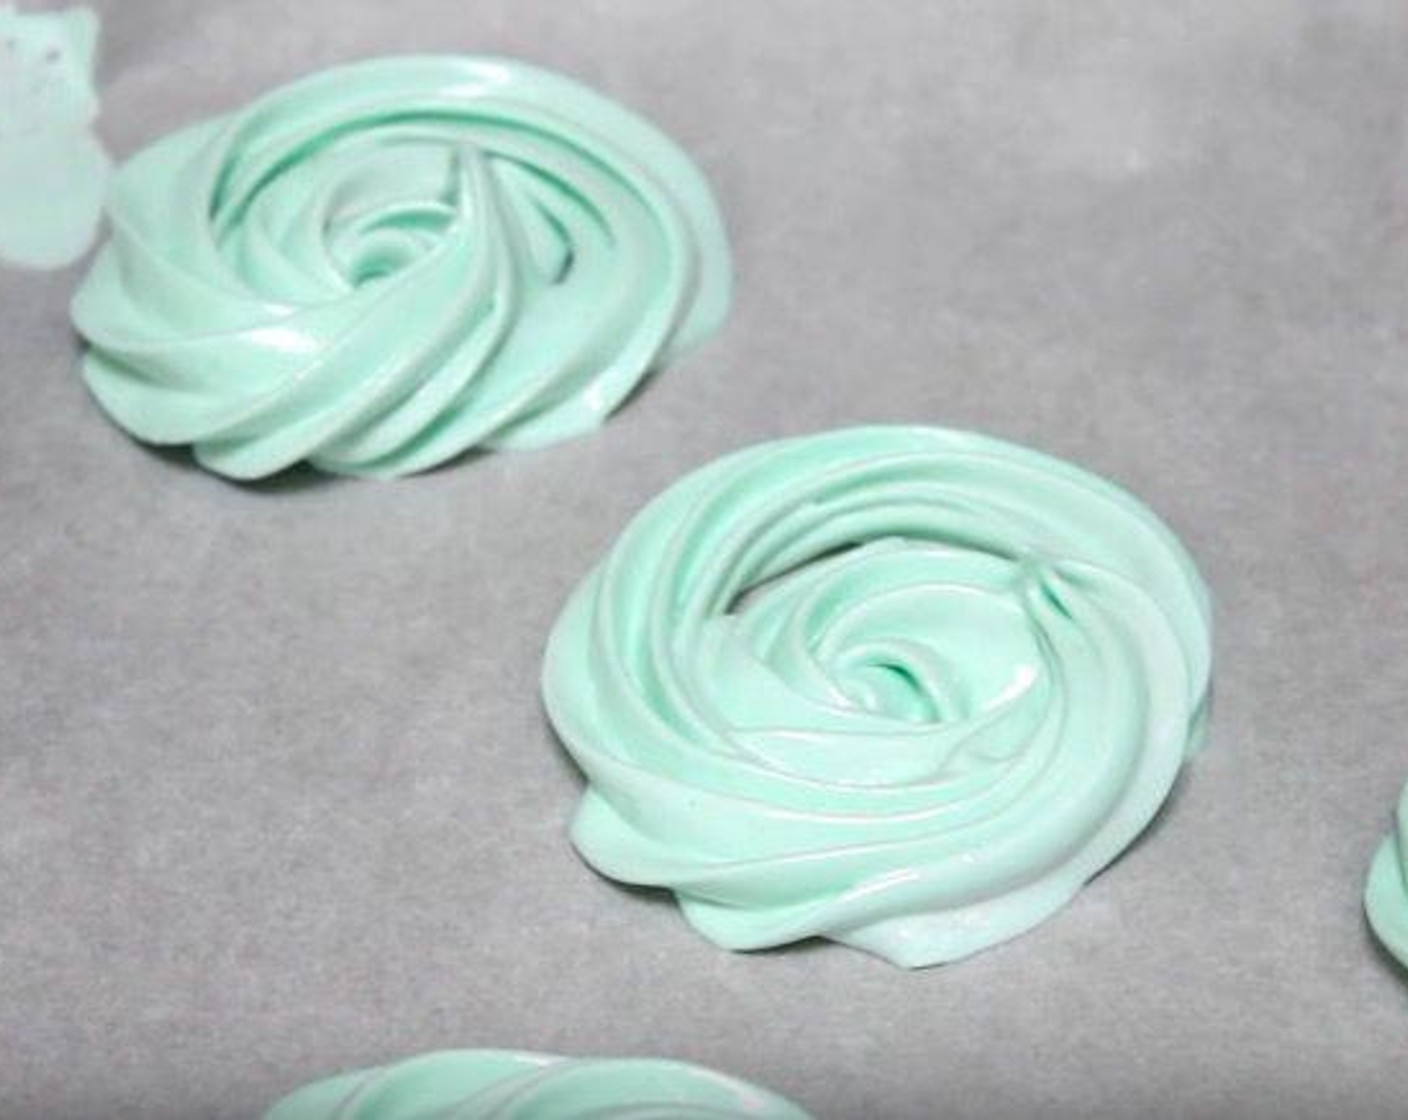 step 5 Add Green Food Coloring (1 drop) and mix to combine. Transfer meringue into a piping bag fitted with a star nozzle. Form roses on the baking sheets. Bake for 2 hours.